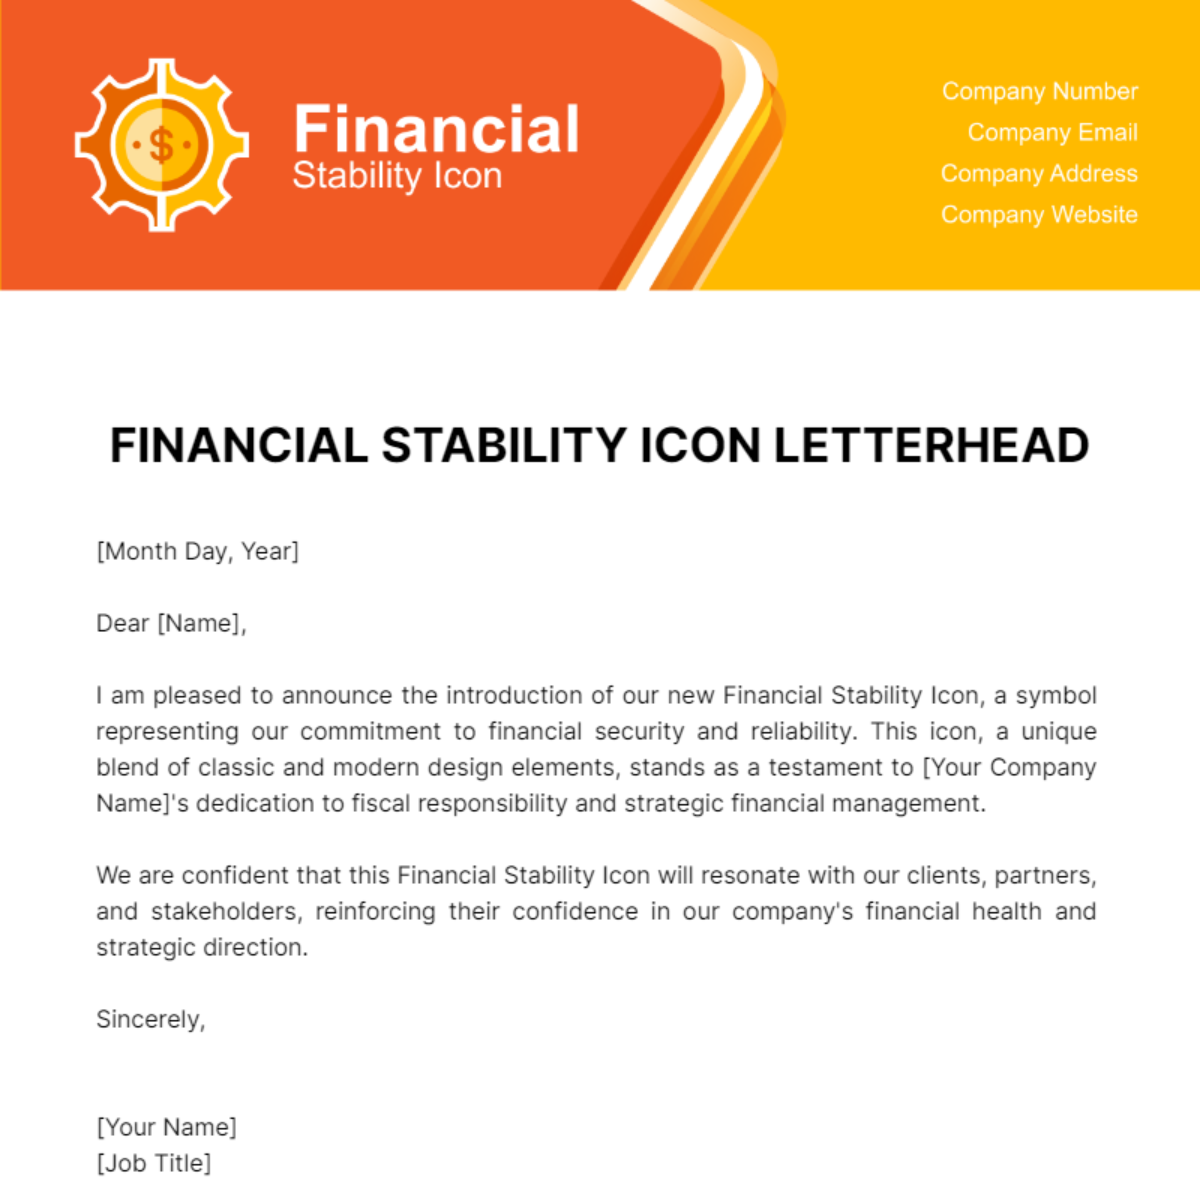 Free Financial Stability Icon Letterhead Template